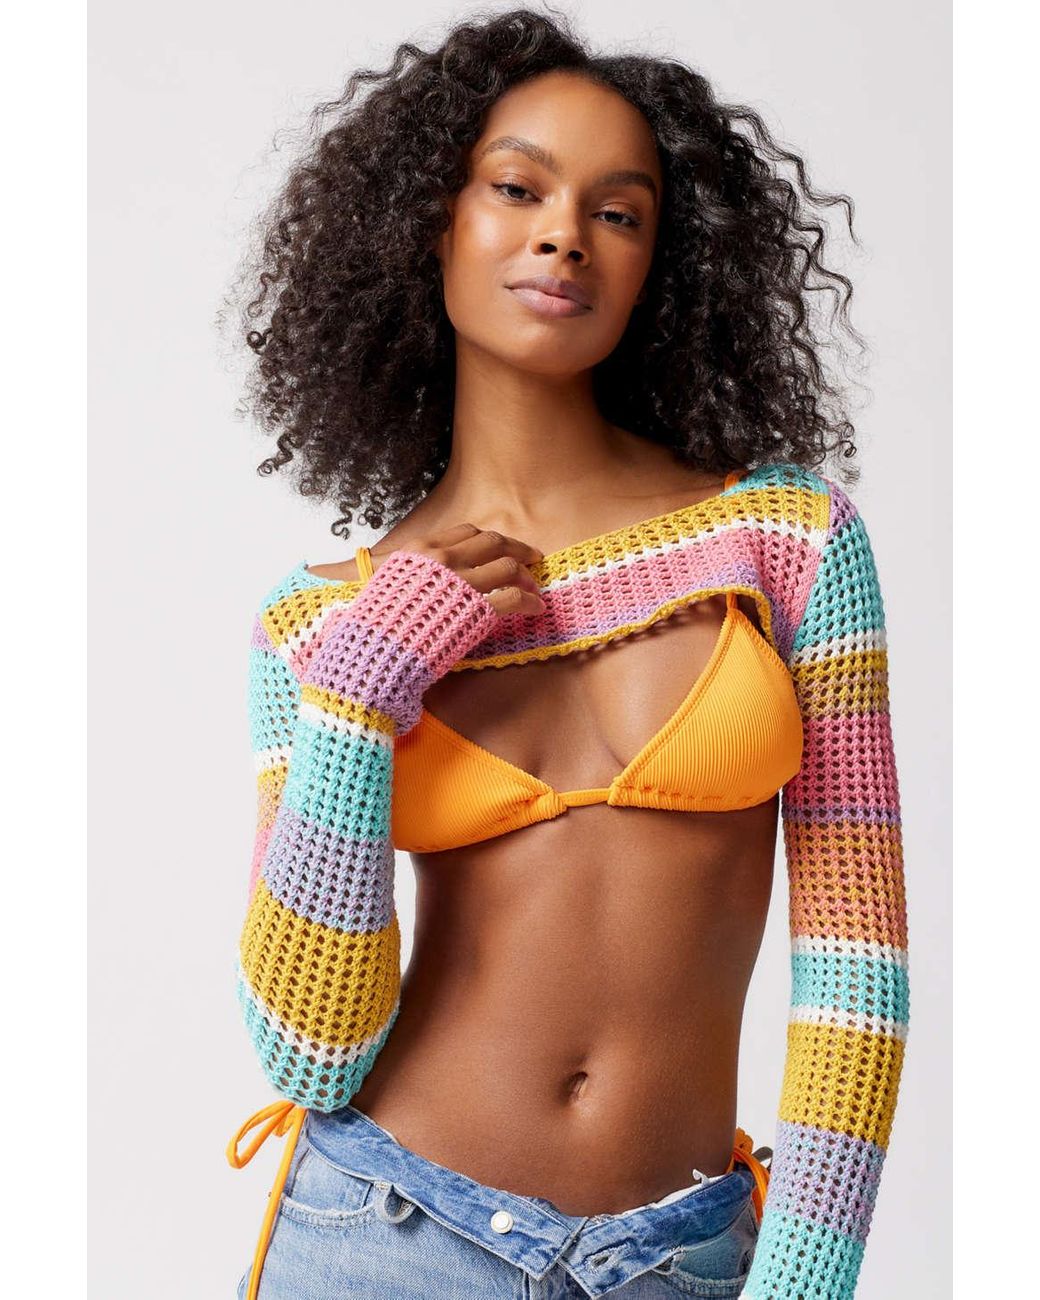 Urban Outfitters Uo Whitney Open-knit Shrug Sweater in Orange